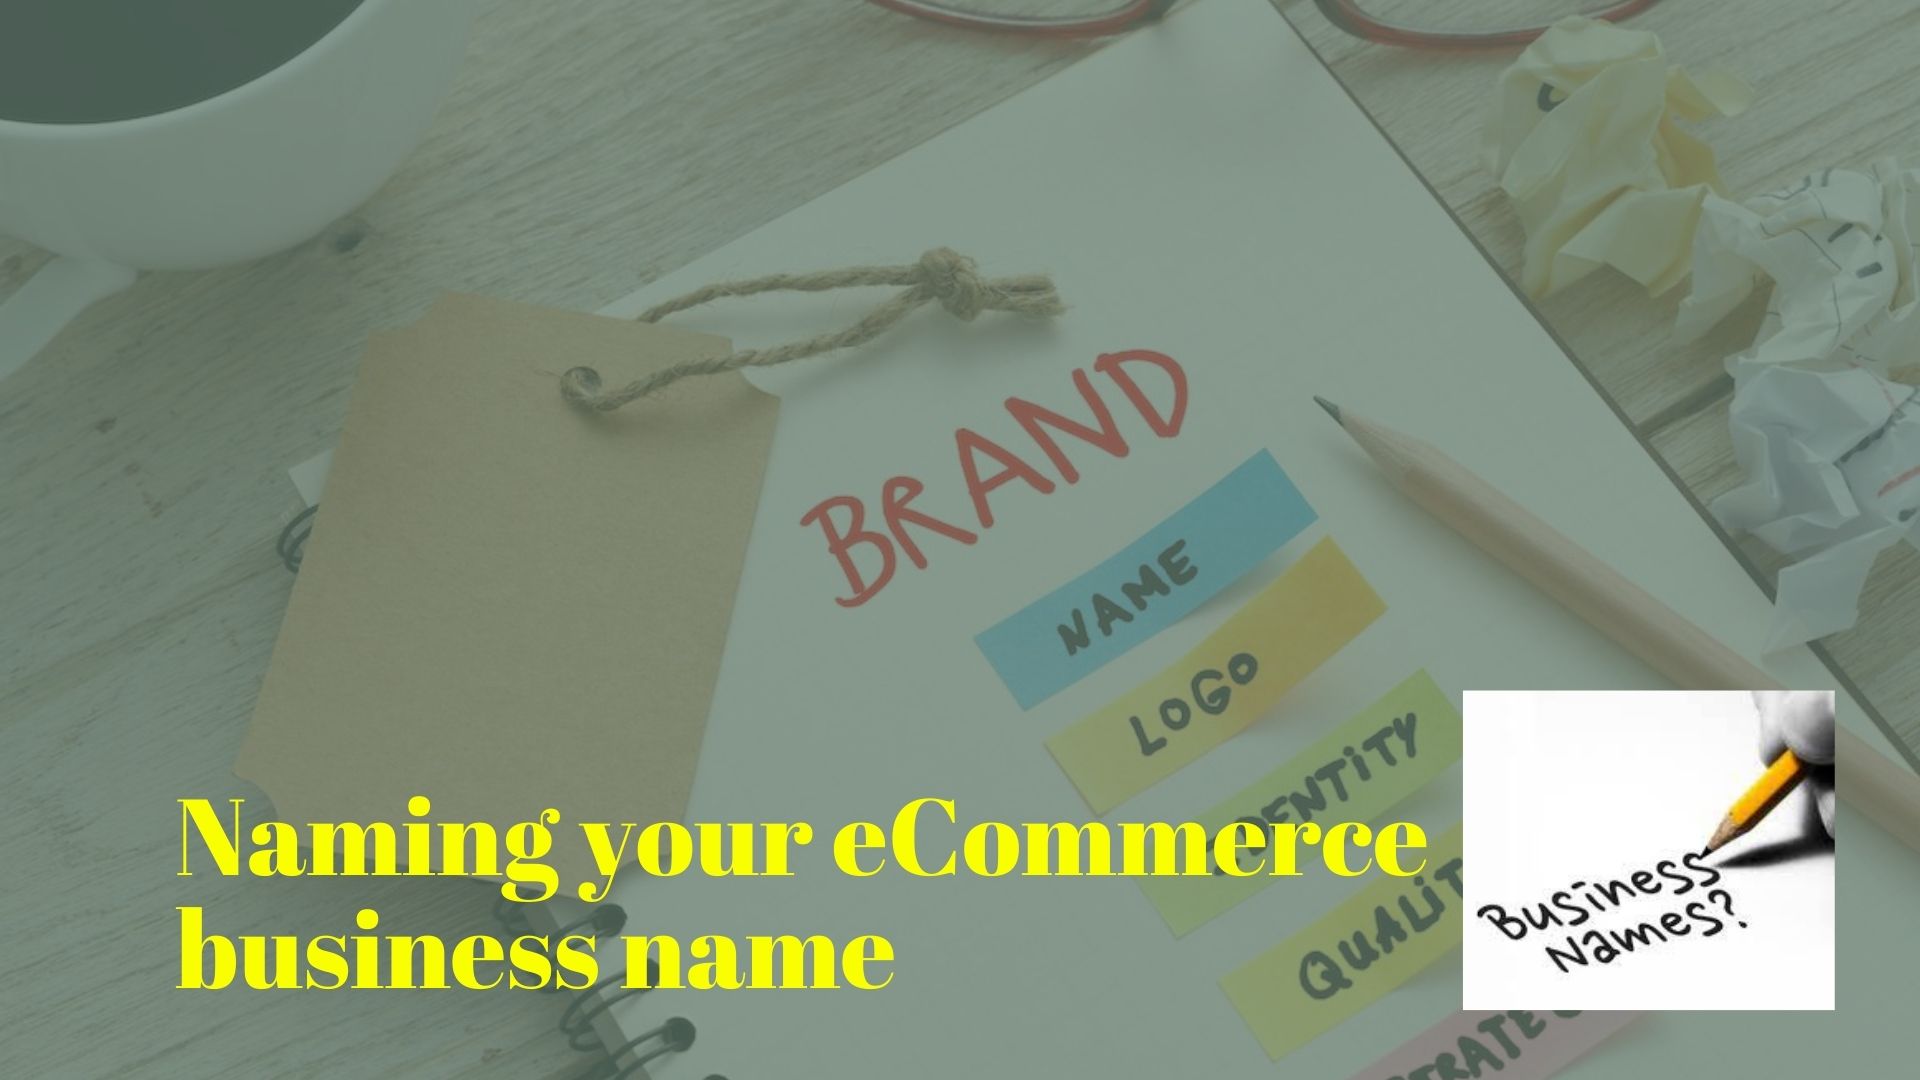 Naming Your eCommerce Business